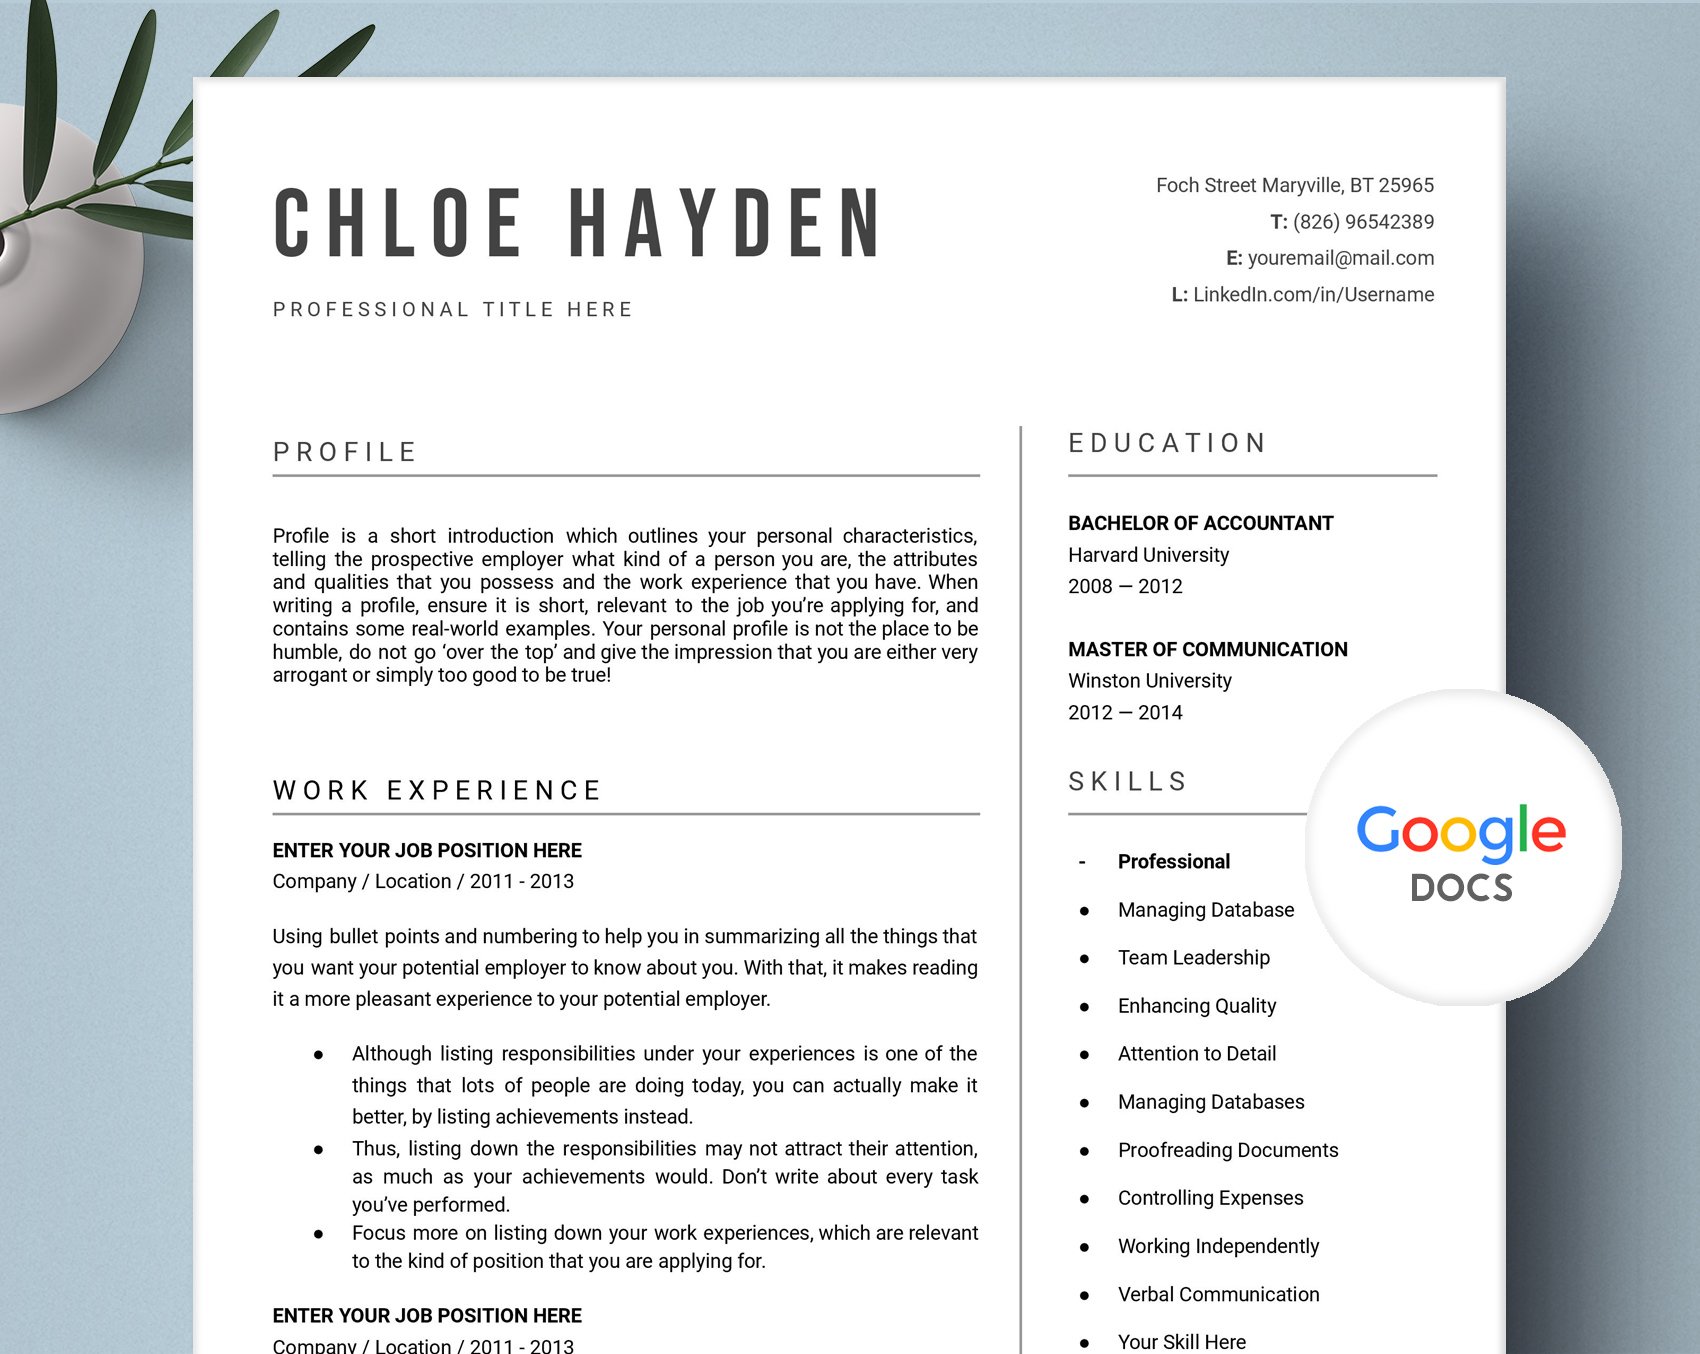 Goggle Docs Resume Template cover image.